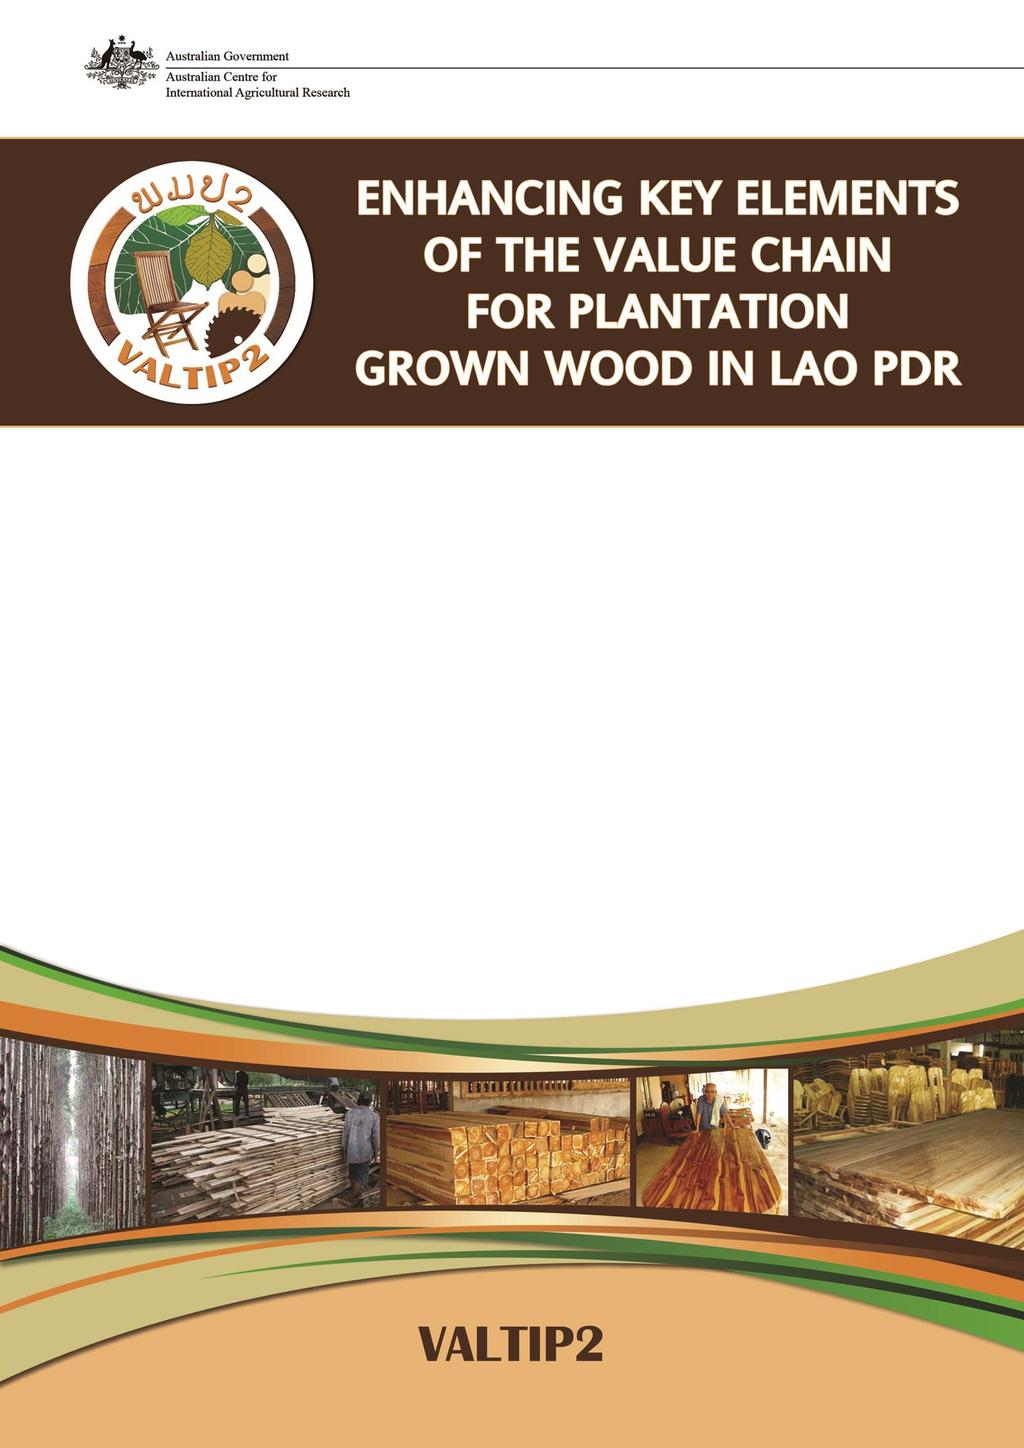 Sawn timber grading in Lao PDR Product grading